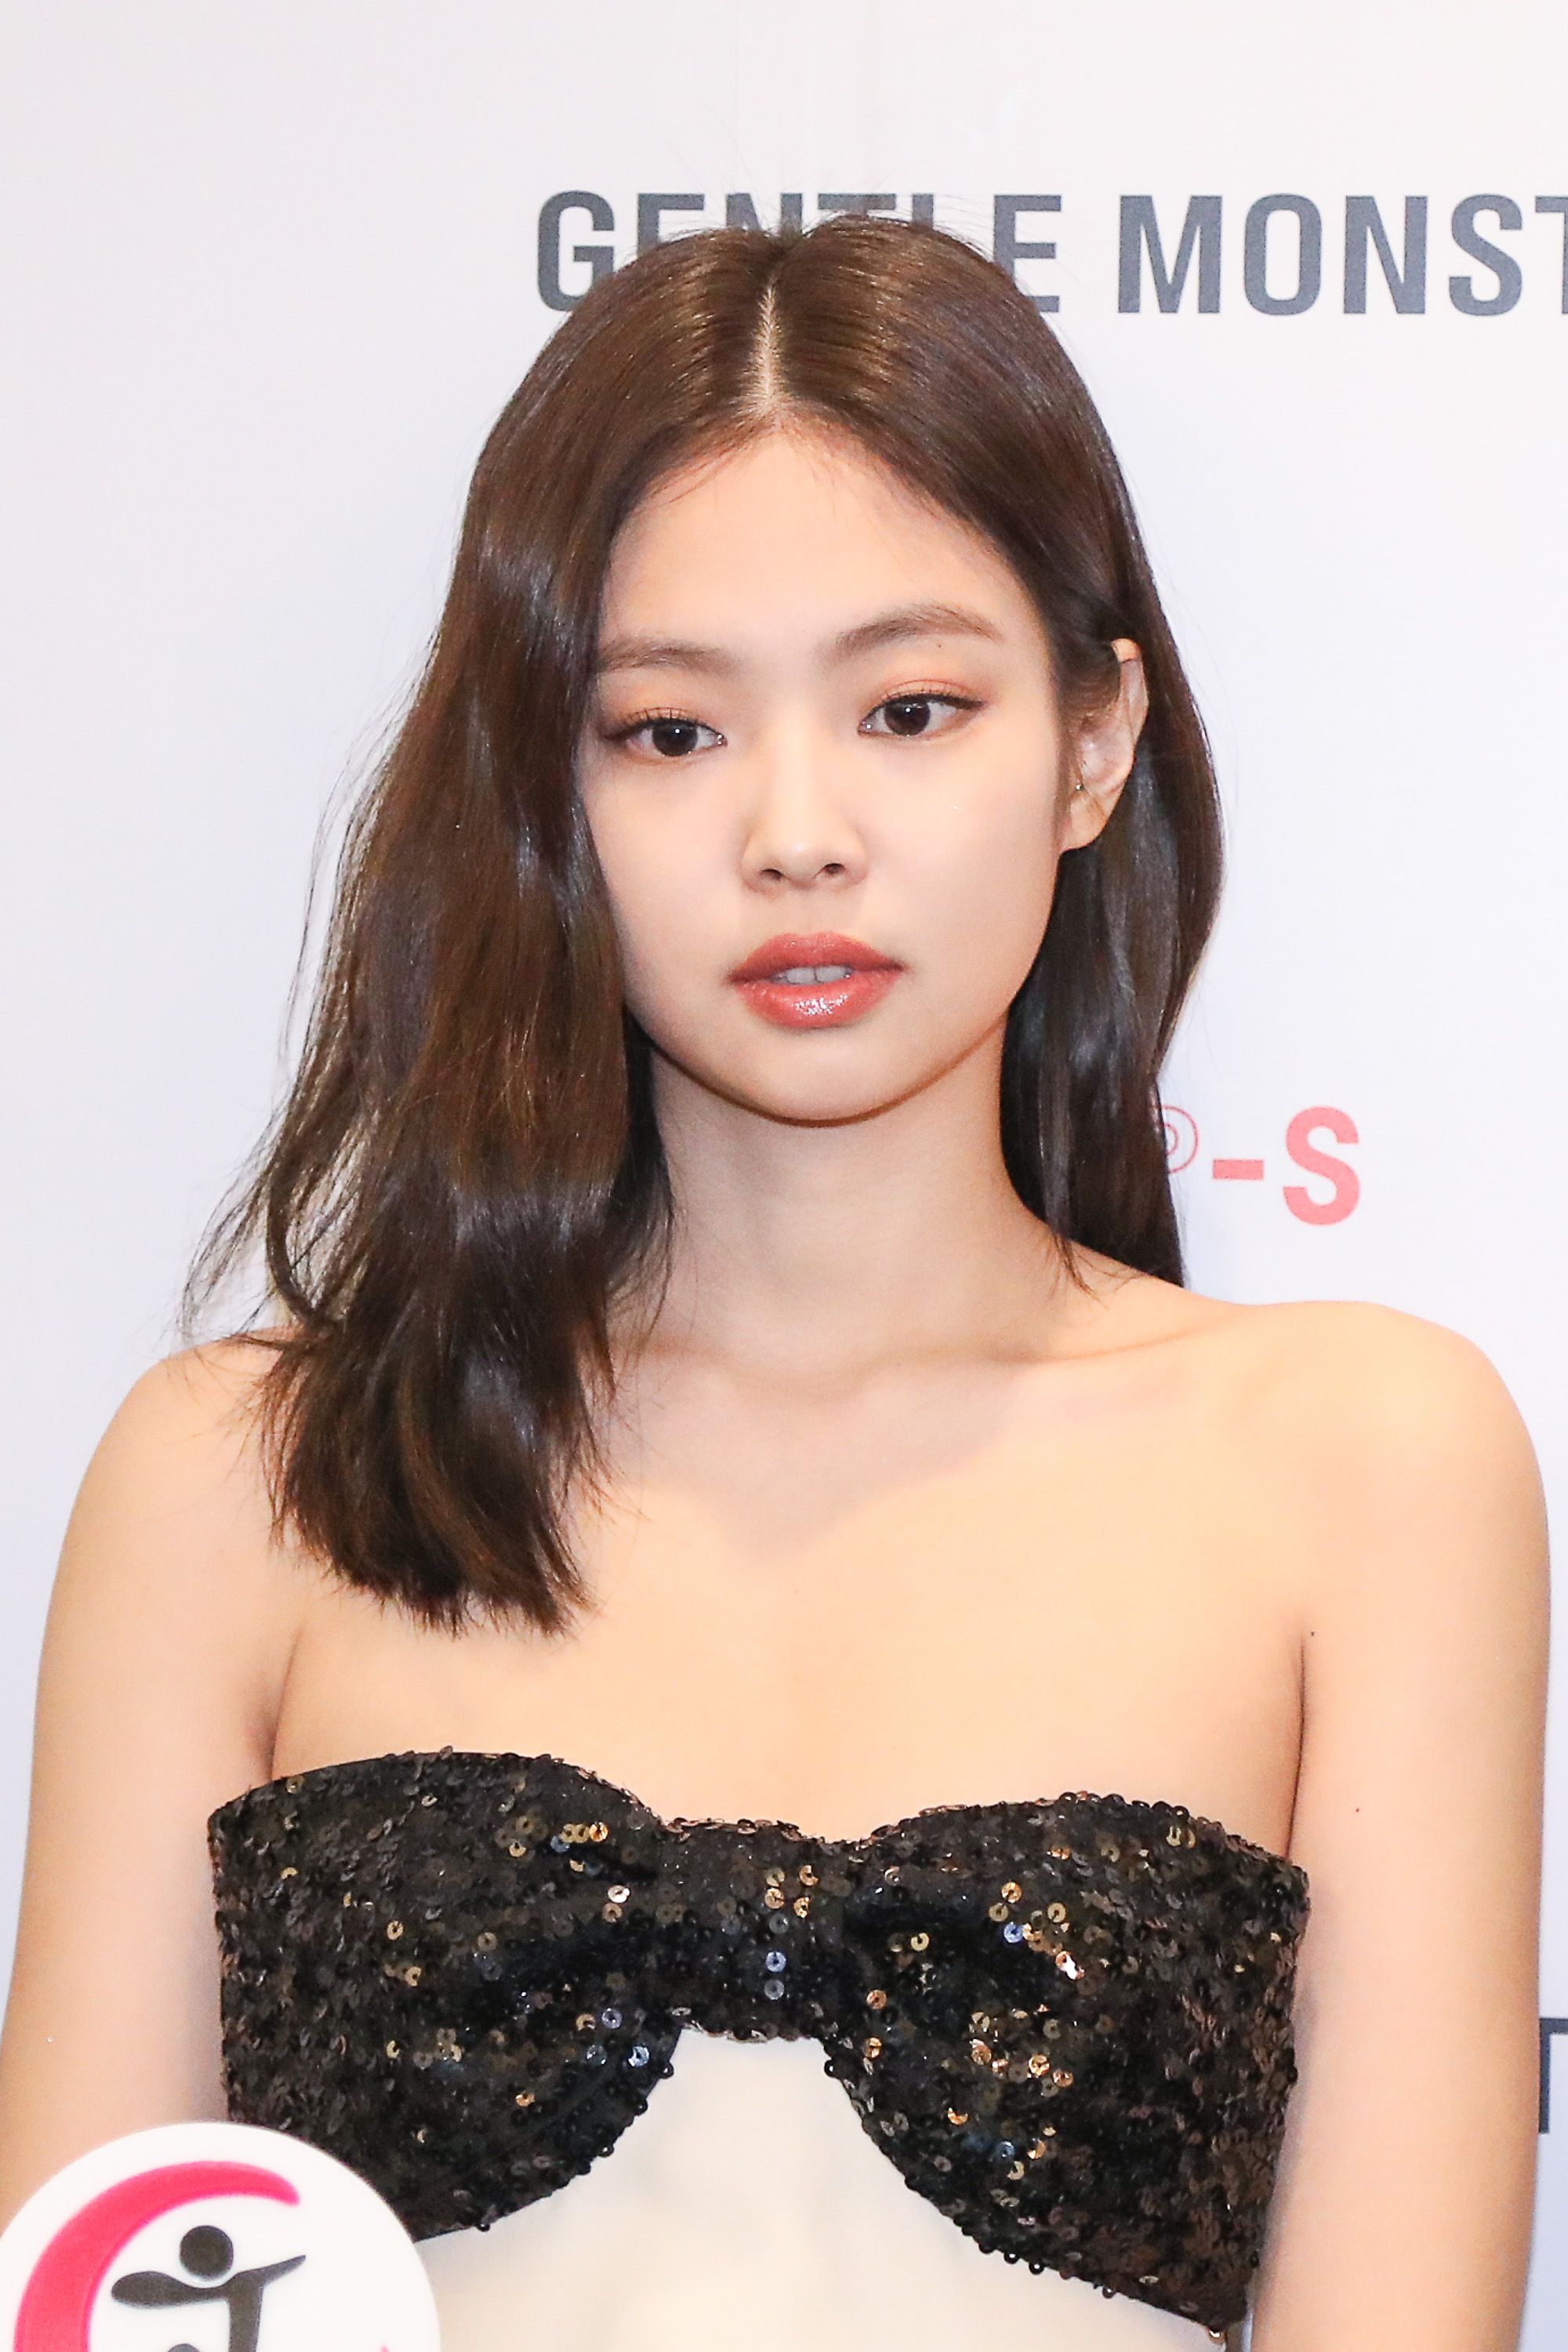 Pinky Xxx Galleries - Blackpink's Jennie Kim asks fans to stop sharing leaked images